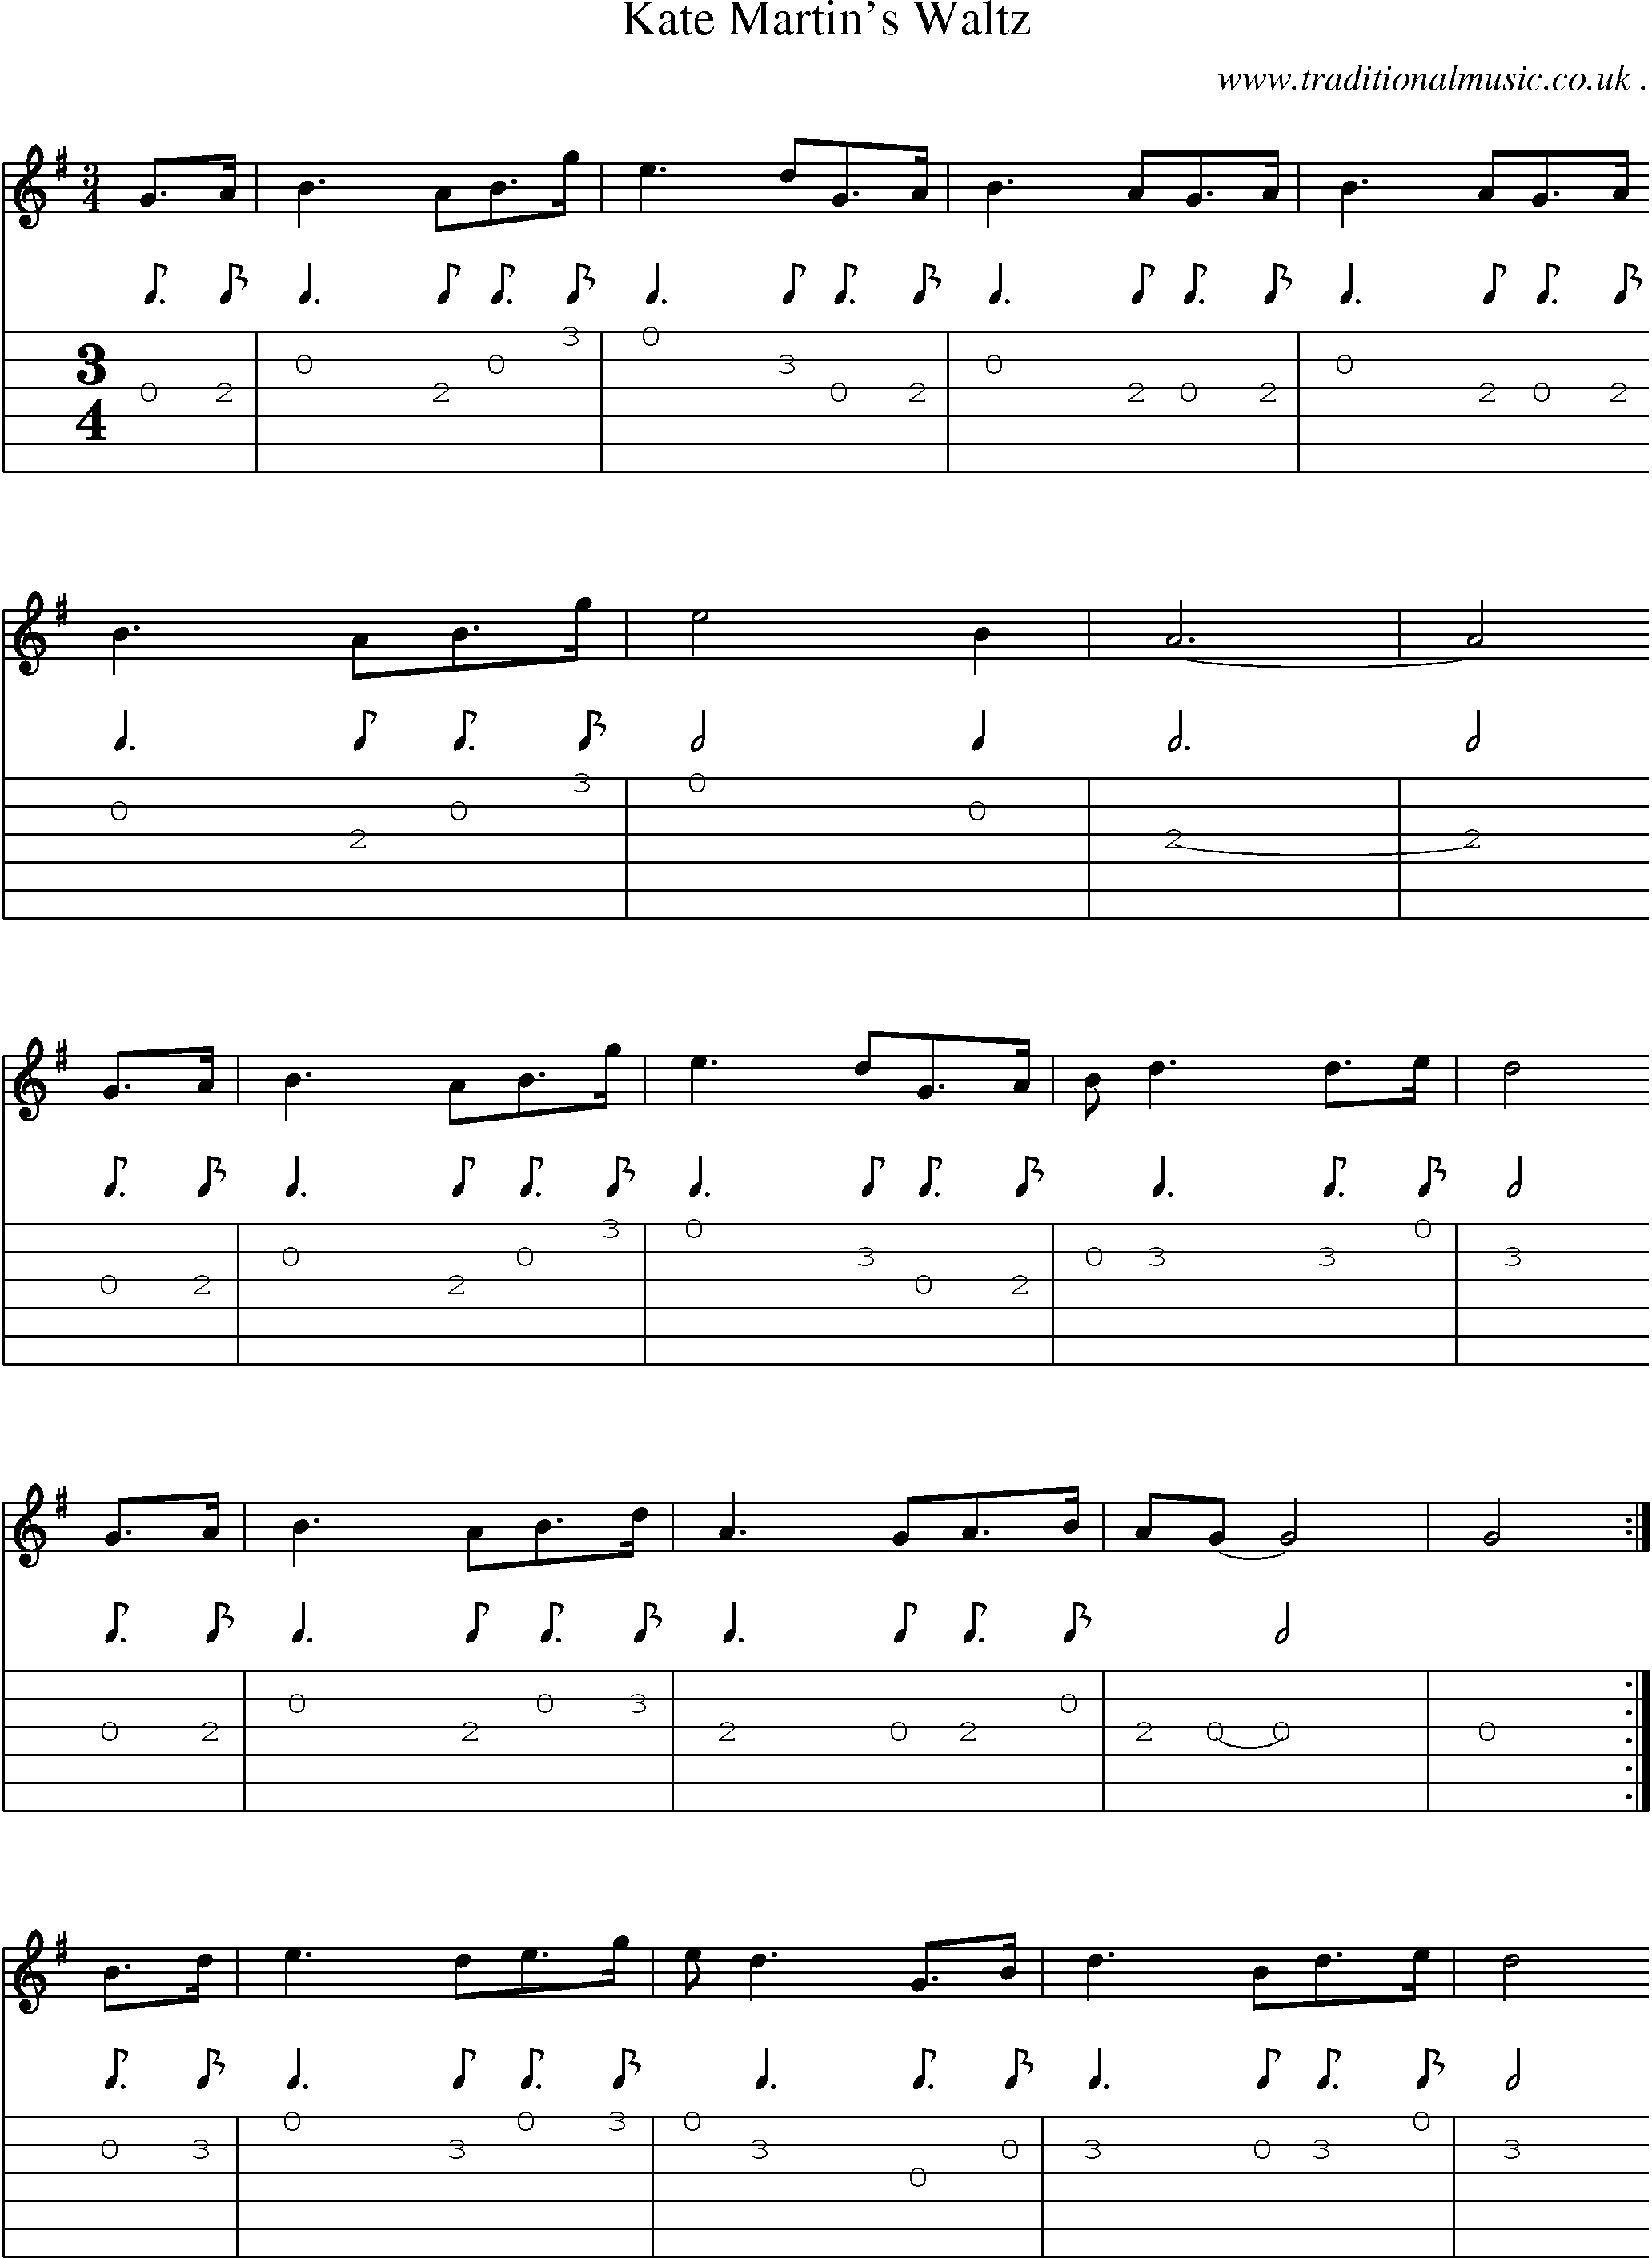 Sheet-music  score, Chords and Guitar Tabs for Kate Martins Waltz